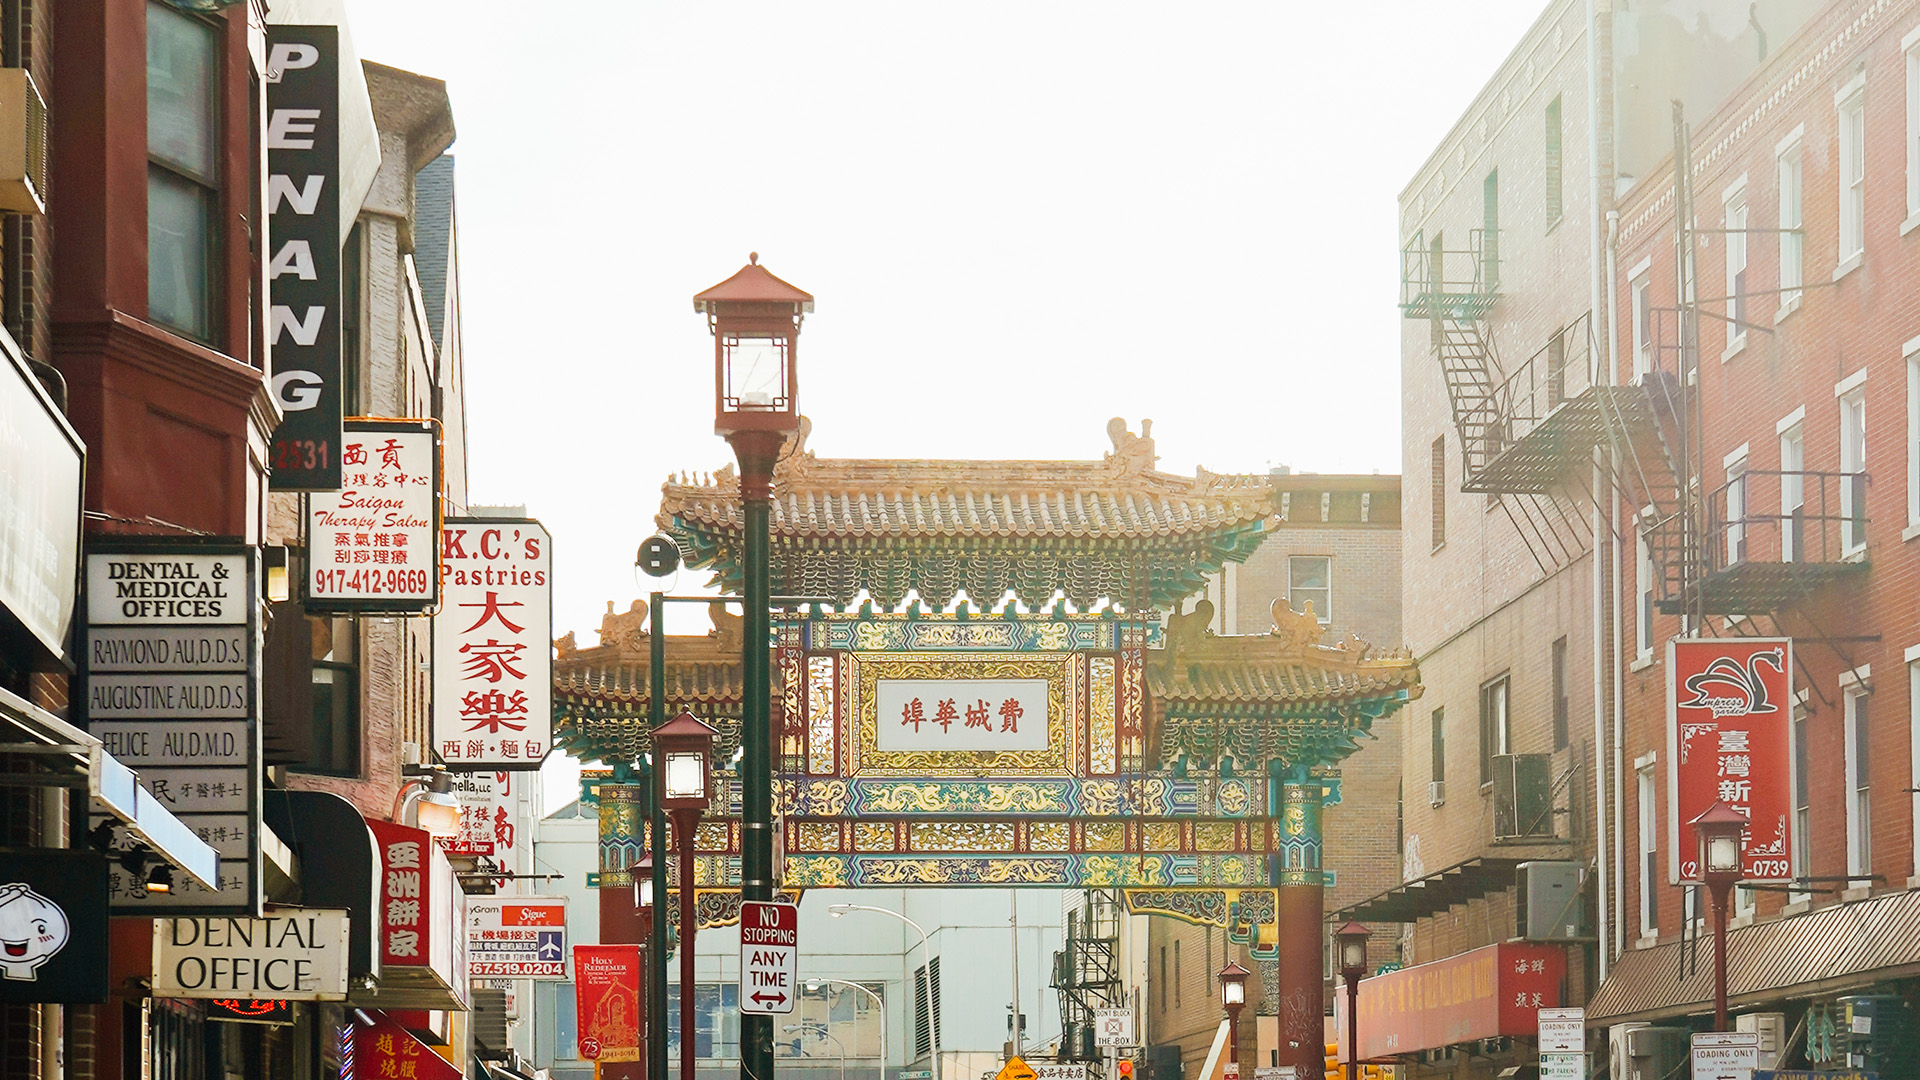 A street in Chinatown with signs for Chinese businesses and a large decorative archway.